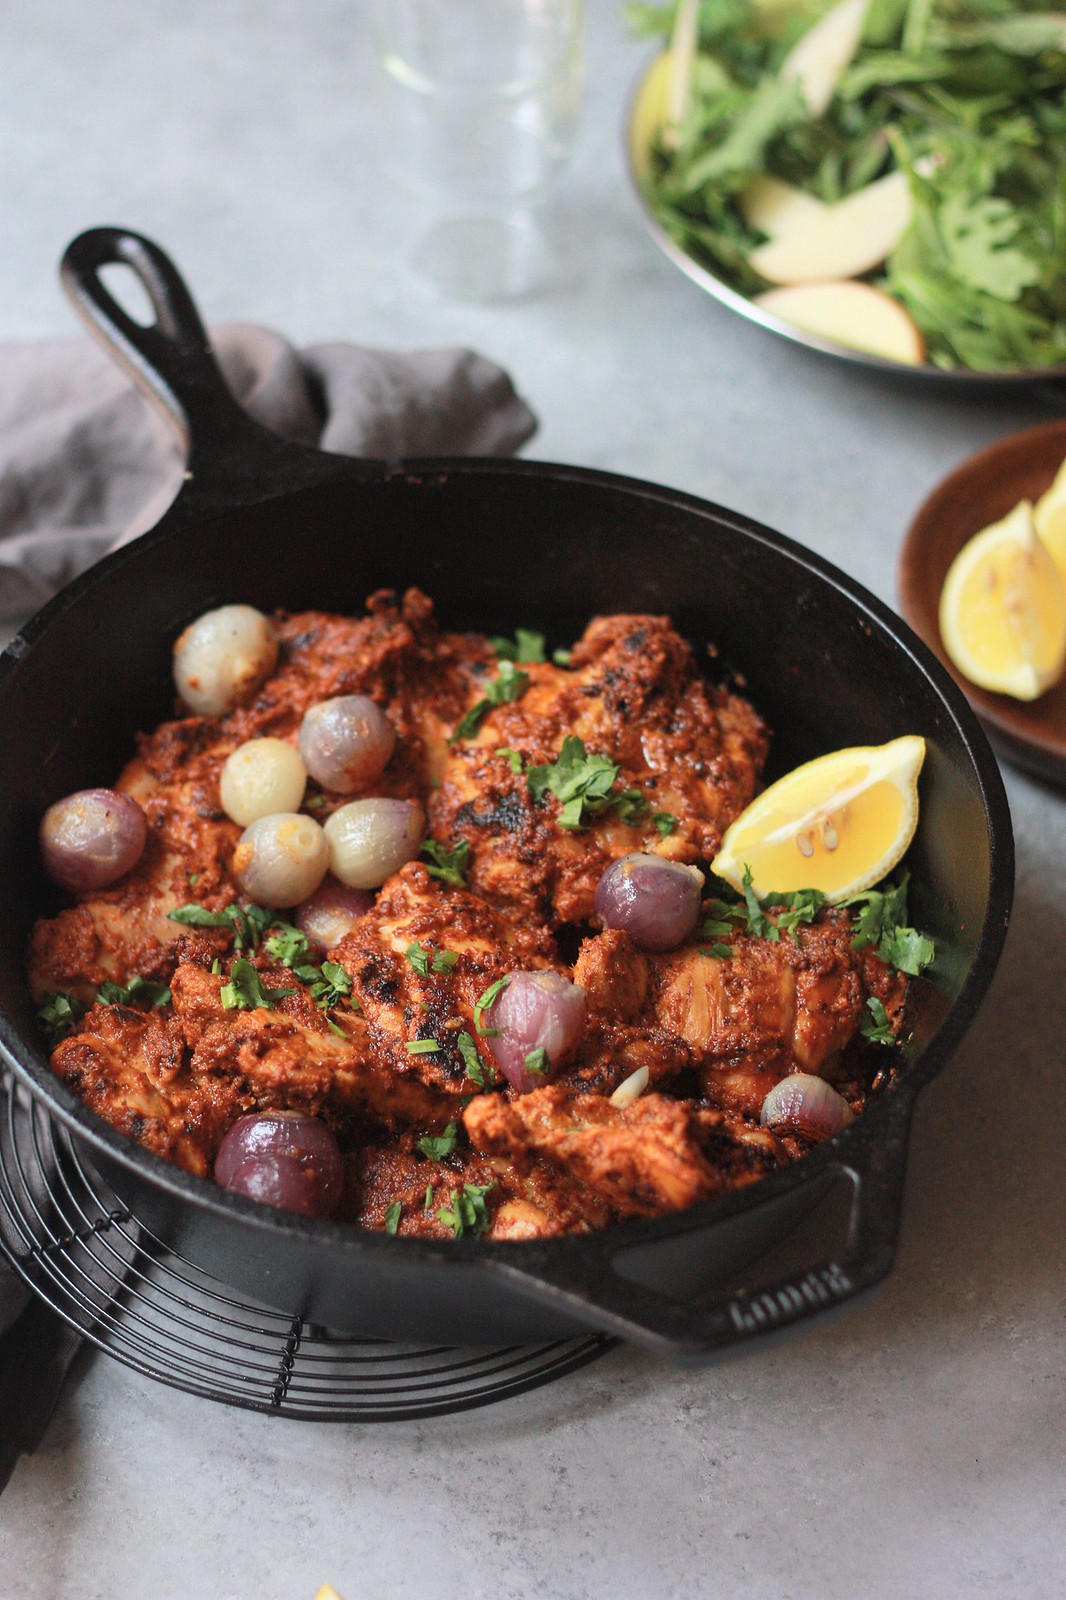 Grilled/Baked Chicken in a Tamarind Masala Sauce